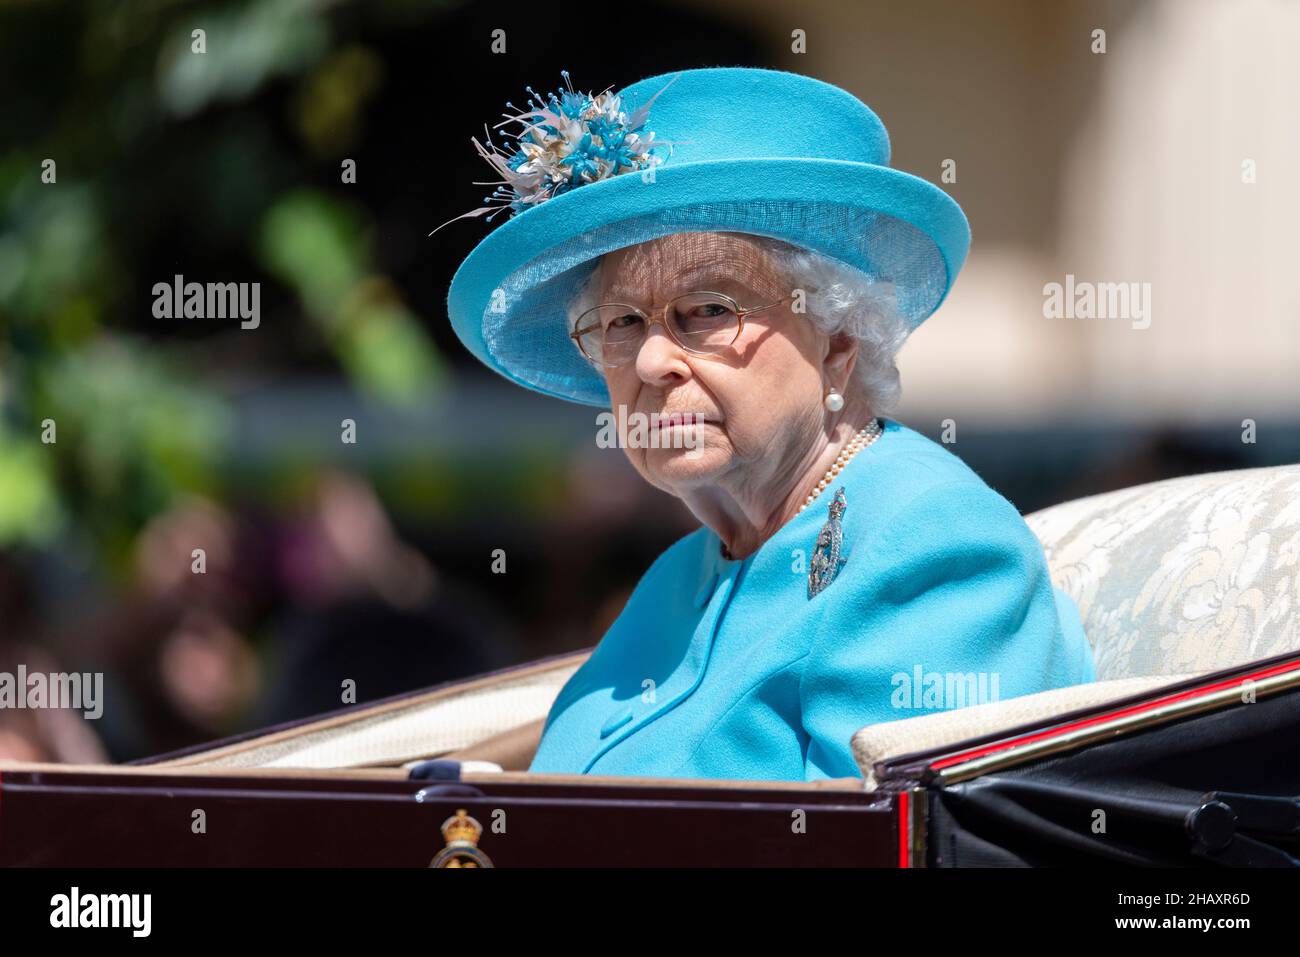 Queen Elizabeth II at Trooping the Colour 2018 in blue Angela Kelly design outfit. Alone in carriage Stock Photo